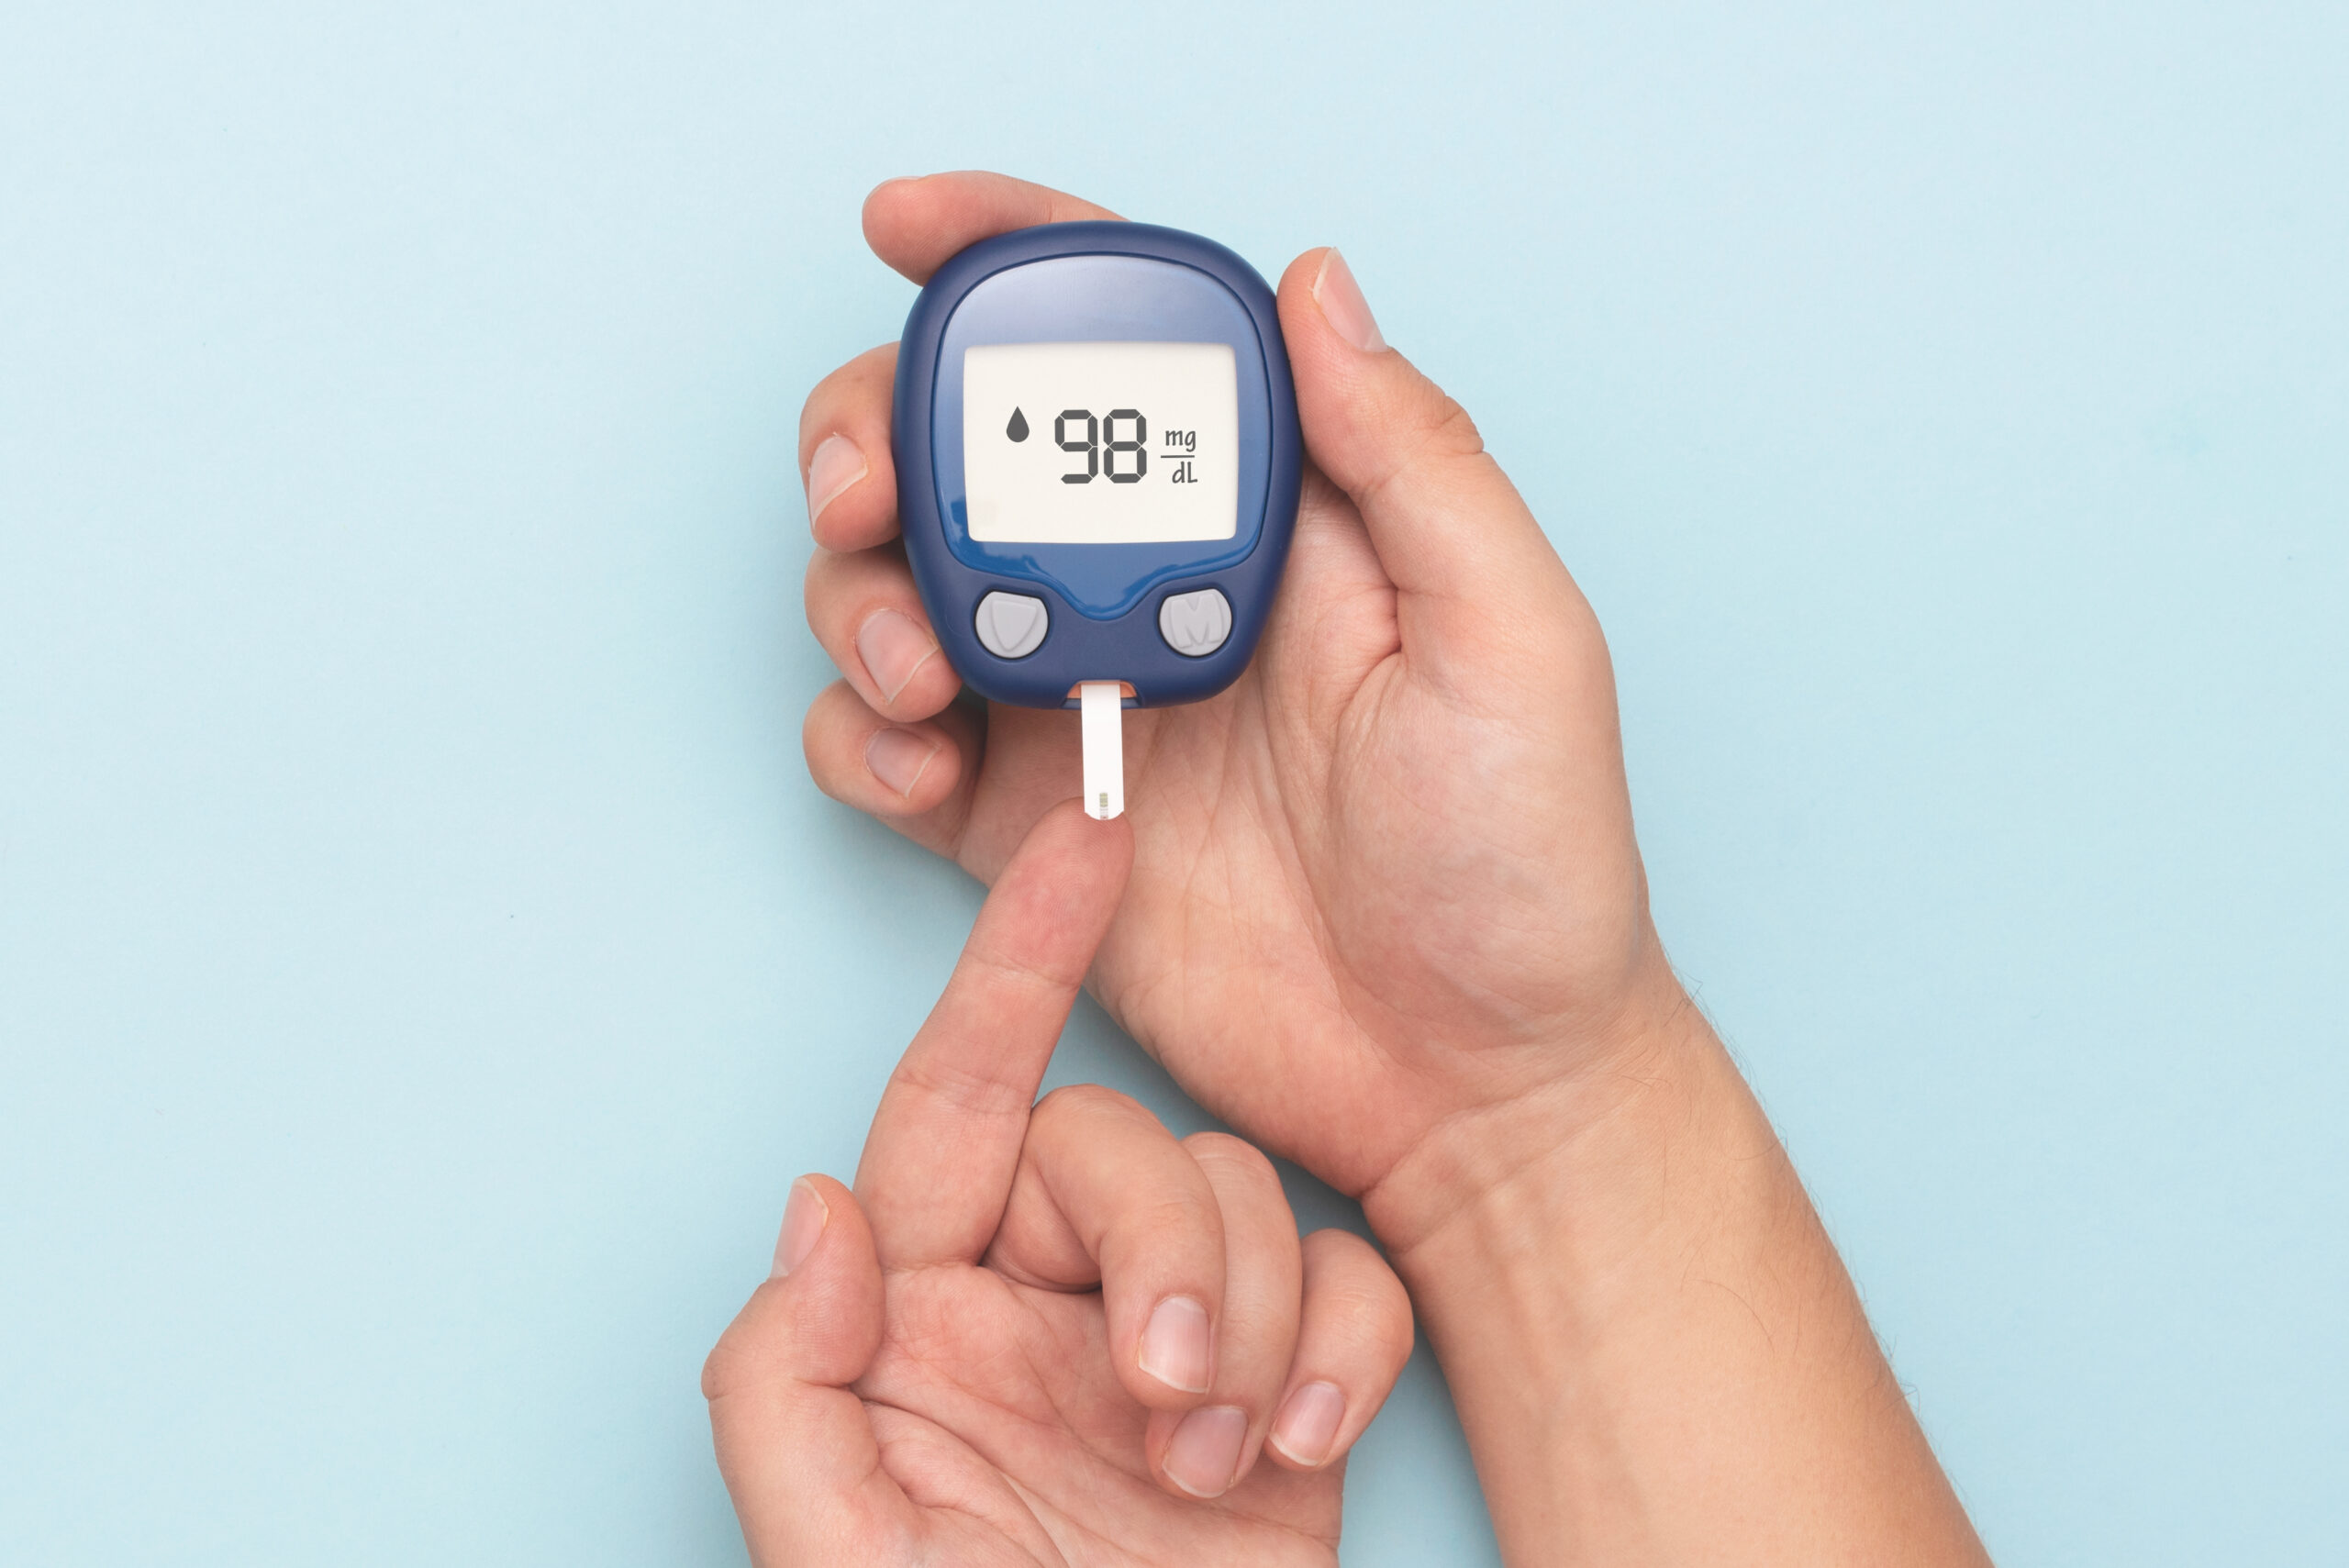 Man using glucometer, checking blood sugar level. Diabetes concept on blue background